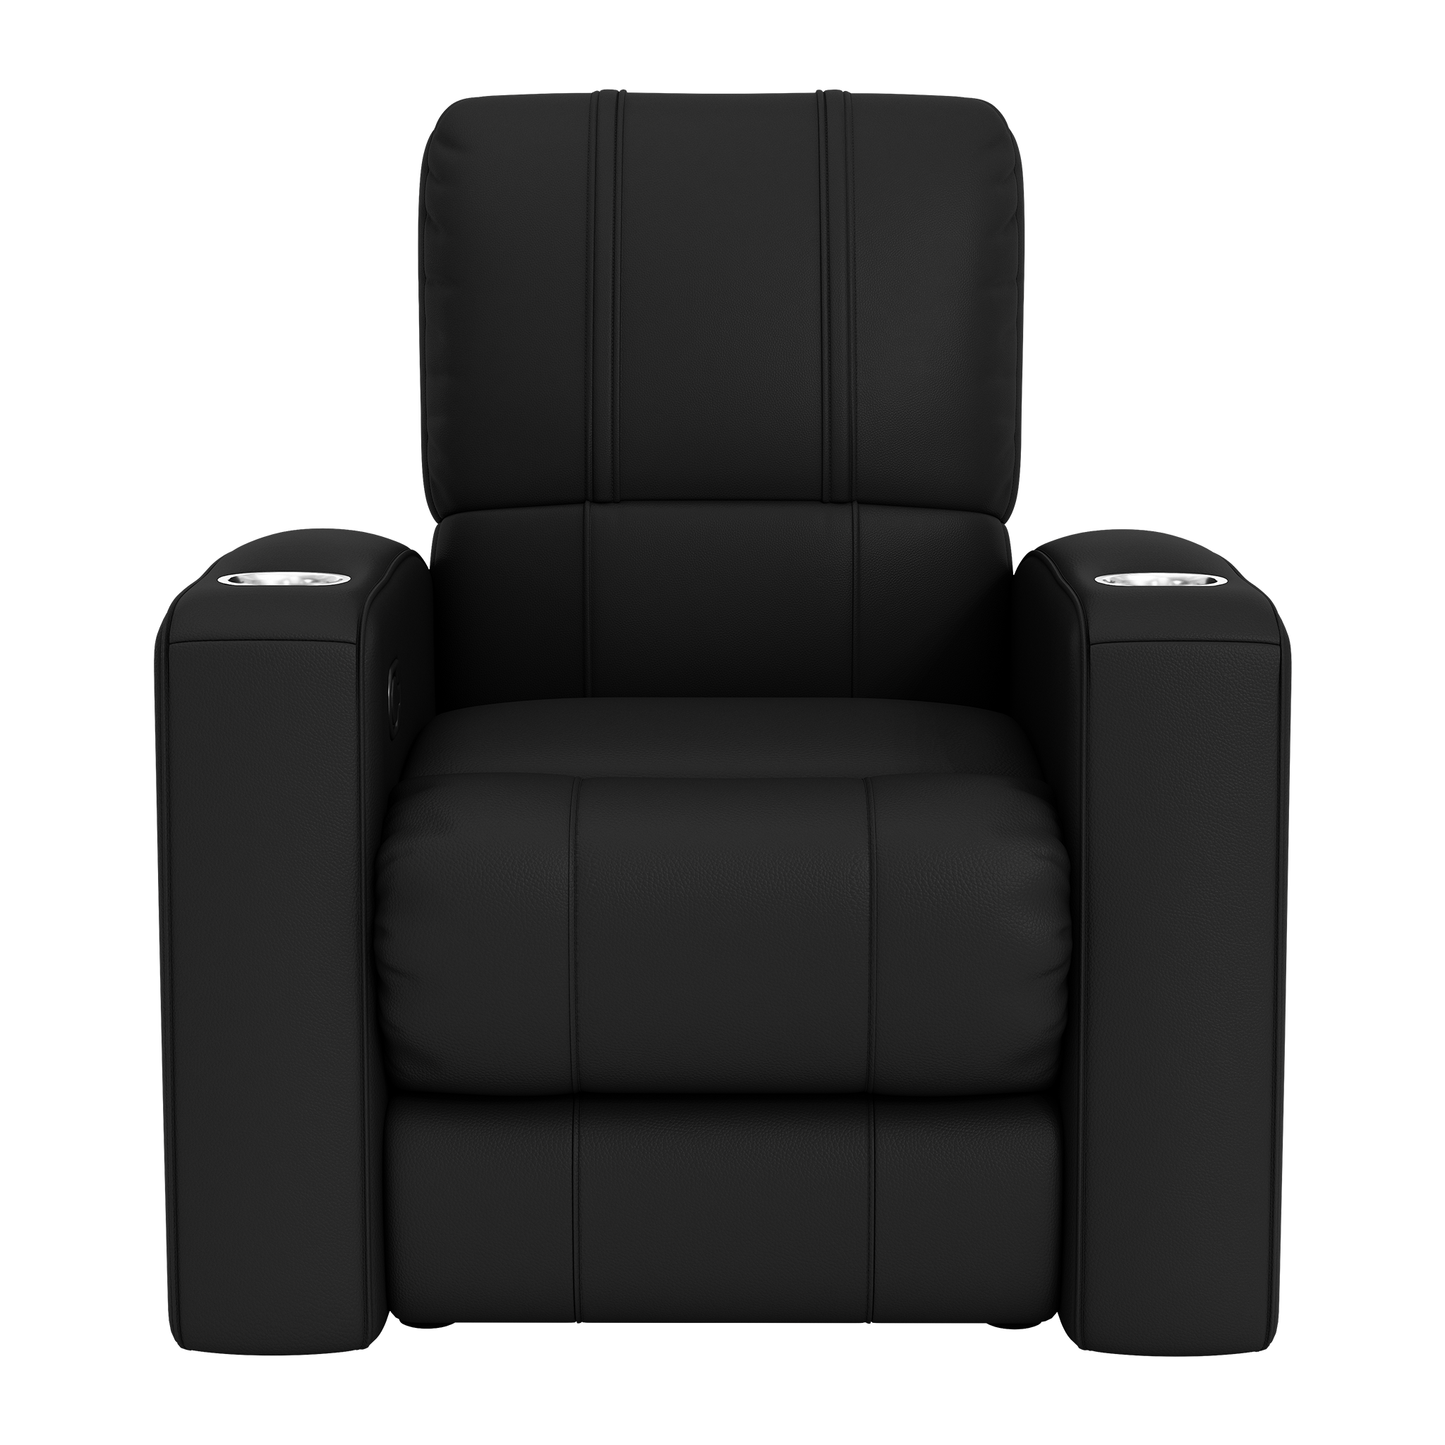 Relax Home Theater Recliner with Florida Marlins Cooperstown Primary